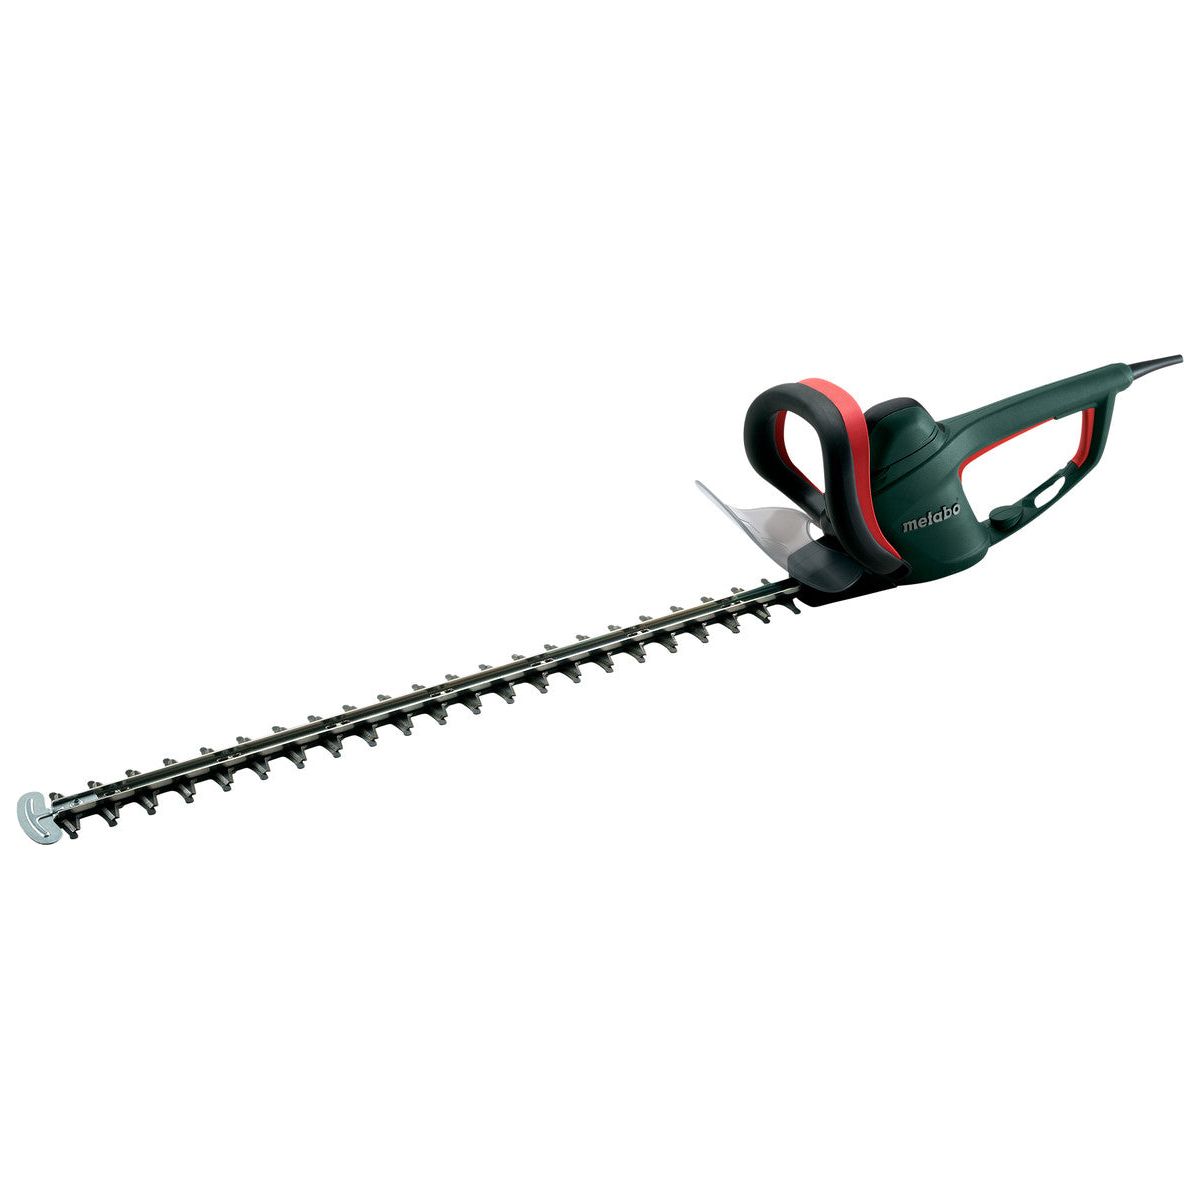 HS 8875 Taille-haie Metabo